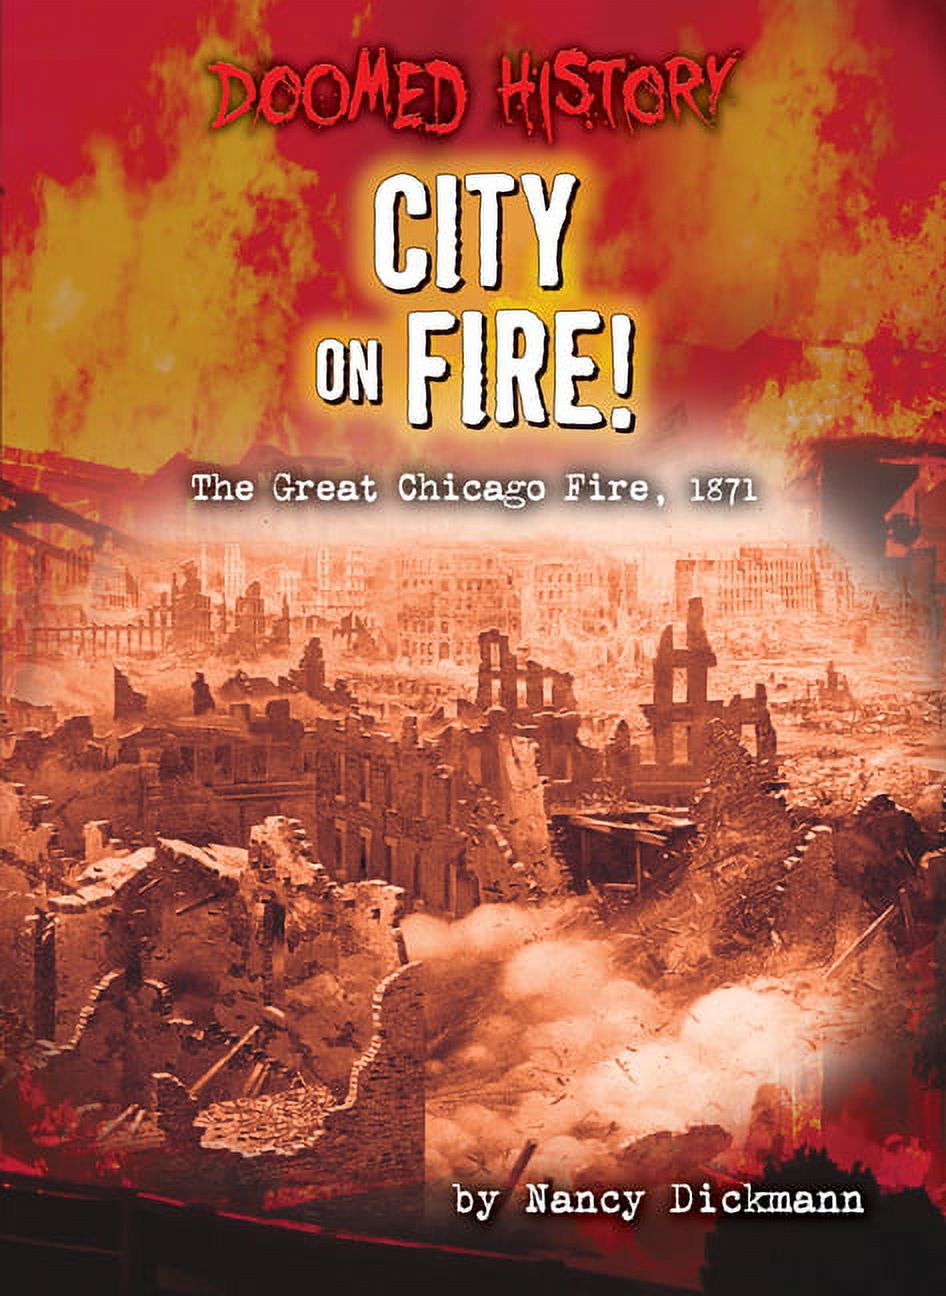 Doomed History (Set 2): City on Fire! : The Great Chicago Fire